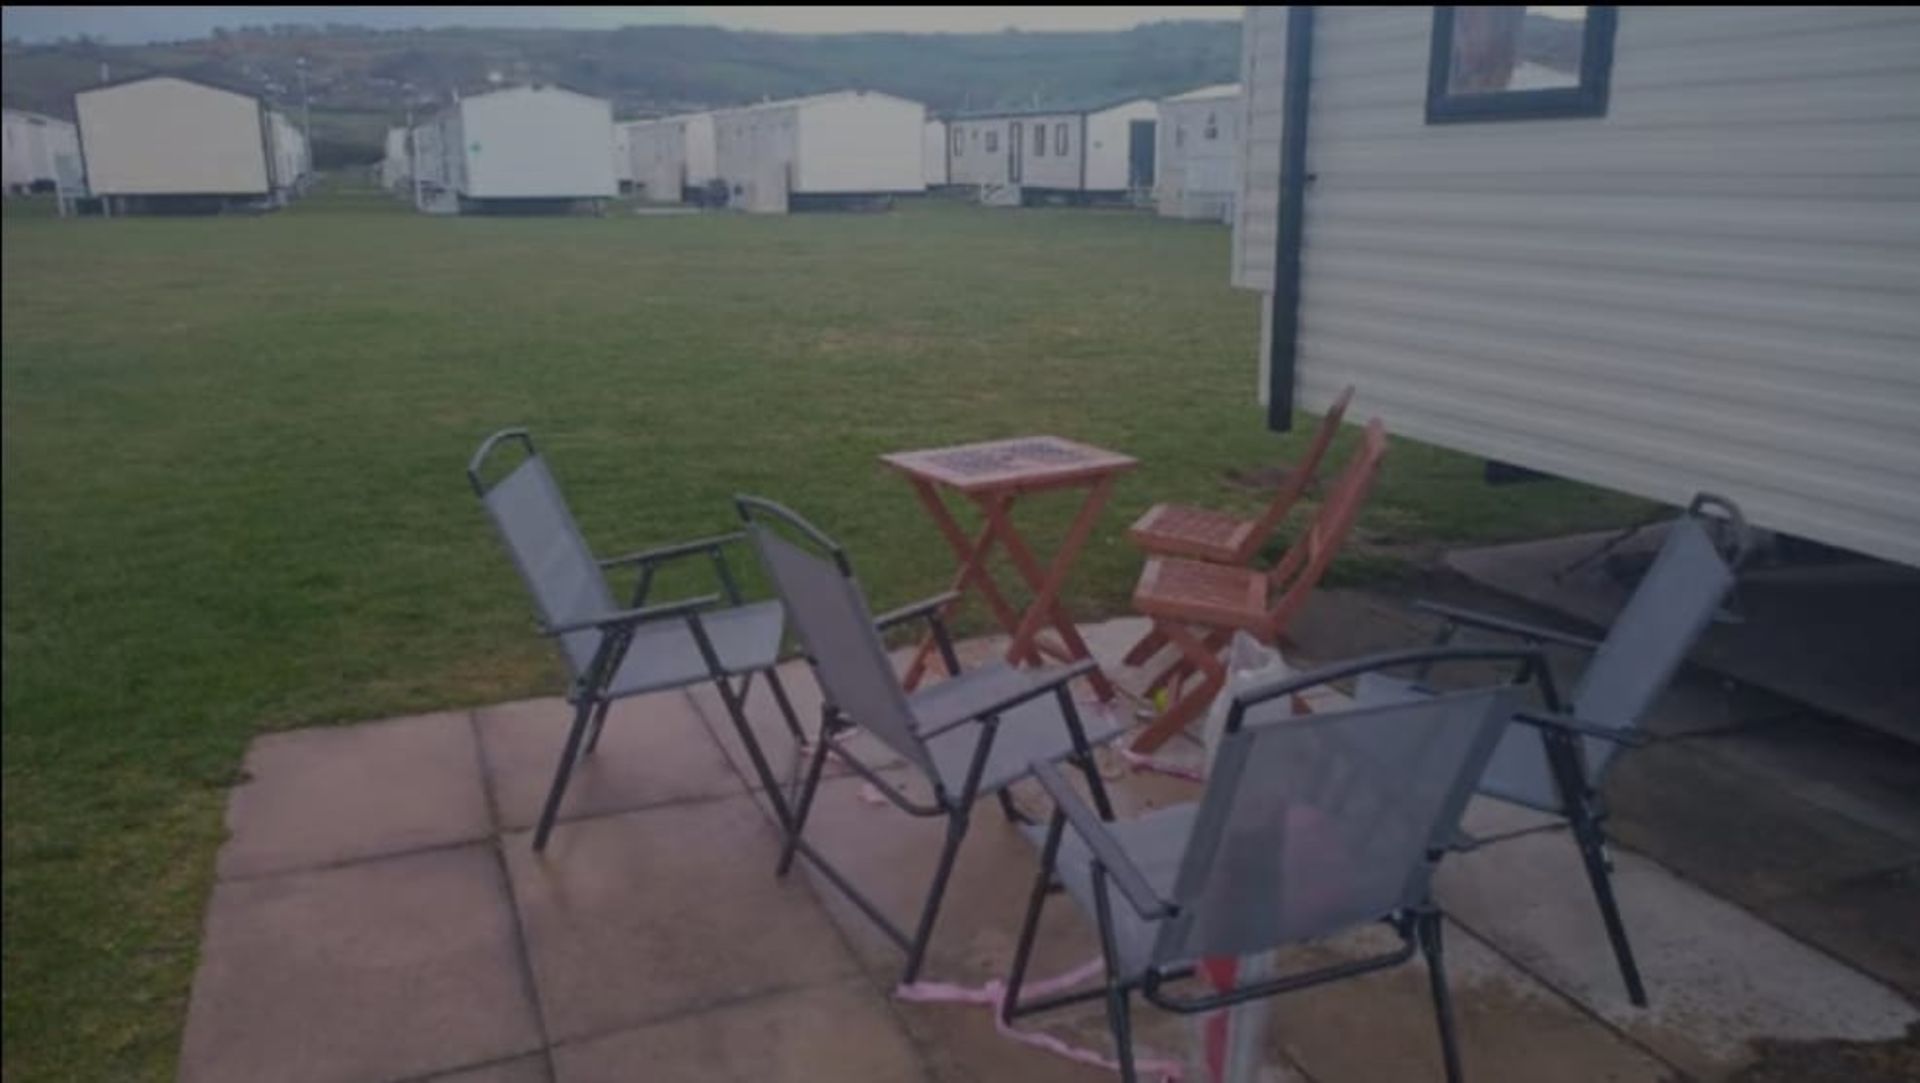 2015 WILLERBY ECO SALSA 3 BEDROOM holiday home ON-SITE SALE. LAST CHANCE!!! **RESERVE REDUCED** - Image 11 of 13